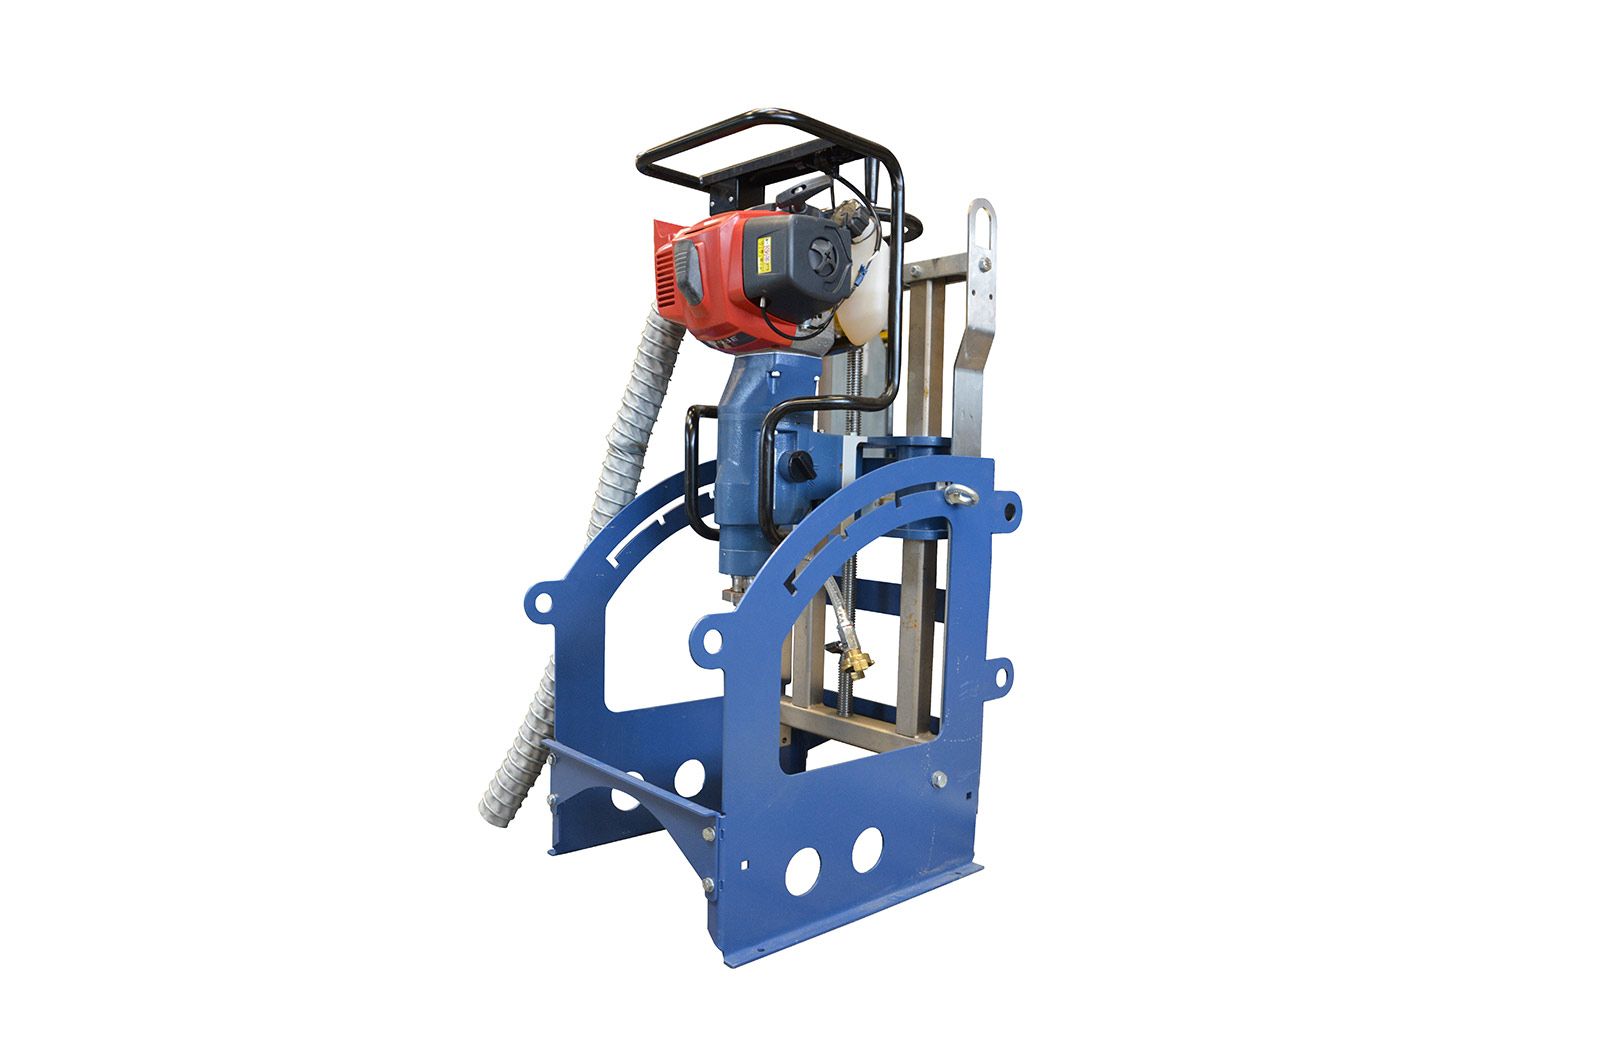 Drill-jet Channel core drilling system